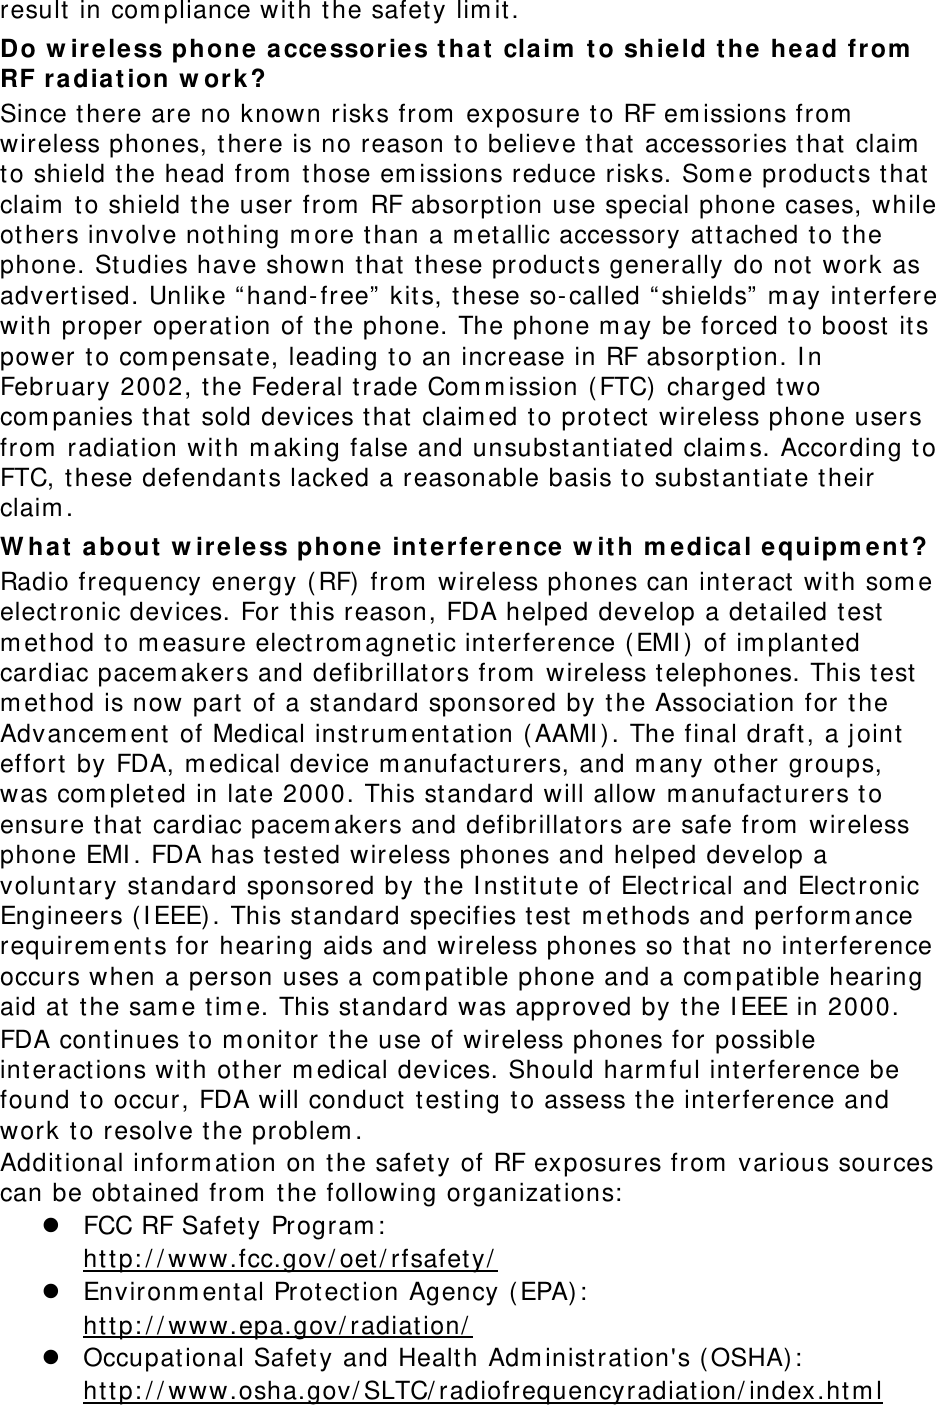 result in com pliance wit h the safet y lim it . Do w ir ele ss phone  accessories t hat claim  t o shield t he hea d from  RF radia t ion w ork? Since there are no known risks from  exposure t o RF em issions from  wireless phones, t here is no reason t o believe that accessories that claim  to shield t he head from  those em issions reduce risks. Som e product s t hat claim  t o shield the user from  RF absorpt ion use special phone cases, while others involve not hing m ore than a m etallic accessory at t ached to the phone. Studies have shown t hat these product s generally do not  work as advert ised. Unlike “ hand- free”  kits, t hese so-called “ shields”  m ay int erfere with proper operation of t he phone. The phone m ay be forced to boost  it s power to com pensat e, leading t o an increase in RF absorption. I n February 2002, the Federal t rade Com m ission ( FTC) charged two com panies t hat sold devices t hat  claim ed to protect  wireless phone users from  radiat ion wit h m aking false and unsubst antiated claim s. According to FTC, these defendant s lacked a reasonable basis t o substantiate t heir claim . W hat about  w ireless phone  int erference  w it h m edica l equipm ent? Radio frequency energy ( RF)  from  wireless phones can int eract with som e elect ronic devices. For this reason, FDA helped develop a det ailed t est  m ethod t o m easure elect rom agnetic int erference ( EMI )  of im plant ed cardiac pacem akers and defibrillators from  wireless t elephones. This t est m ethod is now part  of a standard sponsored by t he Association for t he Advancem ent of Medical instrum ent ation ( AAMI ) . The final draft , a j oint effort  by FDA, m edical device m anufact urers, and m any other groups, was com pleted in lat e 2000. This st andard will allow m anufact urers t o ensure that cardiac pacem akers and defibrillators are safe from  wireless phone EMI . FDA has tested wireless phones and helped develop a volunt ary st andard sponsored by the I nstit ute of Electrical and Elect ronic Engineers ( I EEE) . This standard specifies t est  m et hods and perform ance requirem ents for hearing aids and wireless phones so t hat no int erference occurs when a person uses a com patible phone and a com patible hearing aid at  t he sam e tim e. This standard was approved by t he I EEE in 2000. FDA cont inues to m onit or the use of wireless phones for possible interact ions wit h other m edical devices. Should harm ful int erference be found t o occur, FDA will conduct  t est ing t o assess t he int erference and work t o resolve t he problem . Additional inform at ion on the safet y of RF exposures from  various sources can be obtained from  t he following organizations:  z FCC RF Safet y Program :   http: / / www.fcc.gov/ oet/ rfsafet y/  z Environm ent al Prot ect ion Agency ( EPA) :   http: / / www.epa.gov/ radiat ion/  z Occupational Safet y and Health Adm inist ration&apos;s ( OSHA) :          ht t p: / / www.osha.gov/ SLTC/ radiofrequencyradiat ion/ index.htm l 